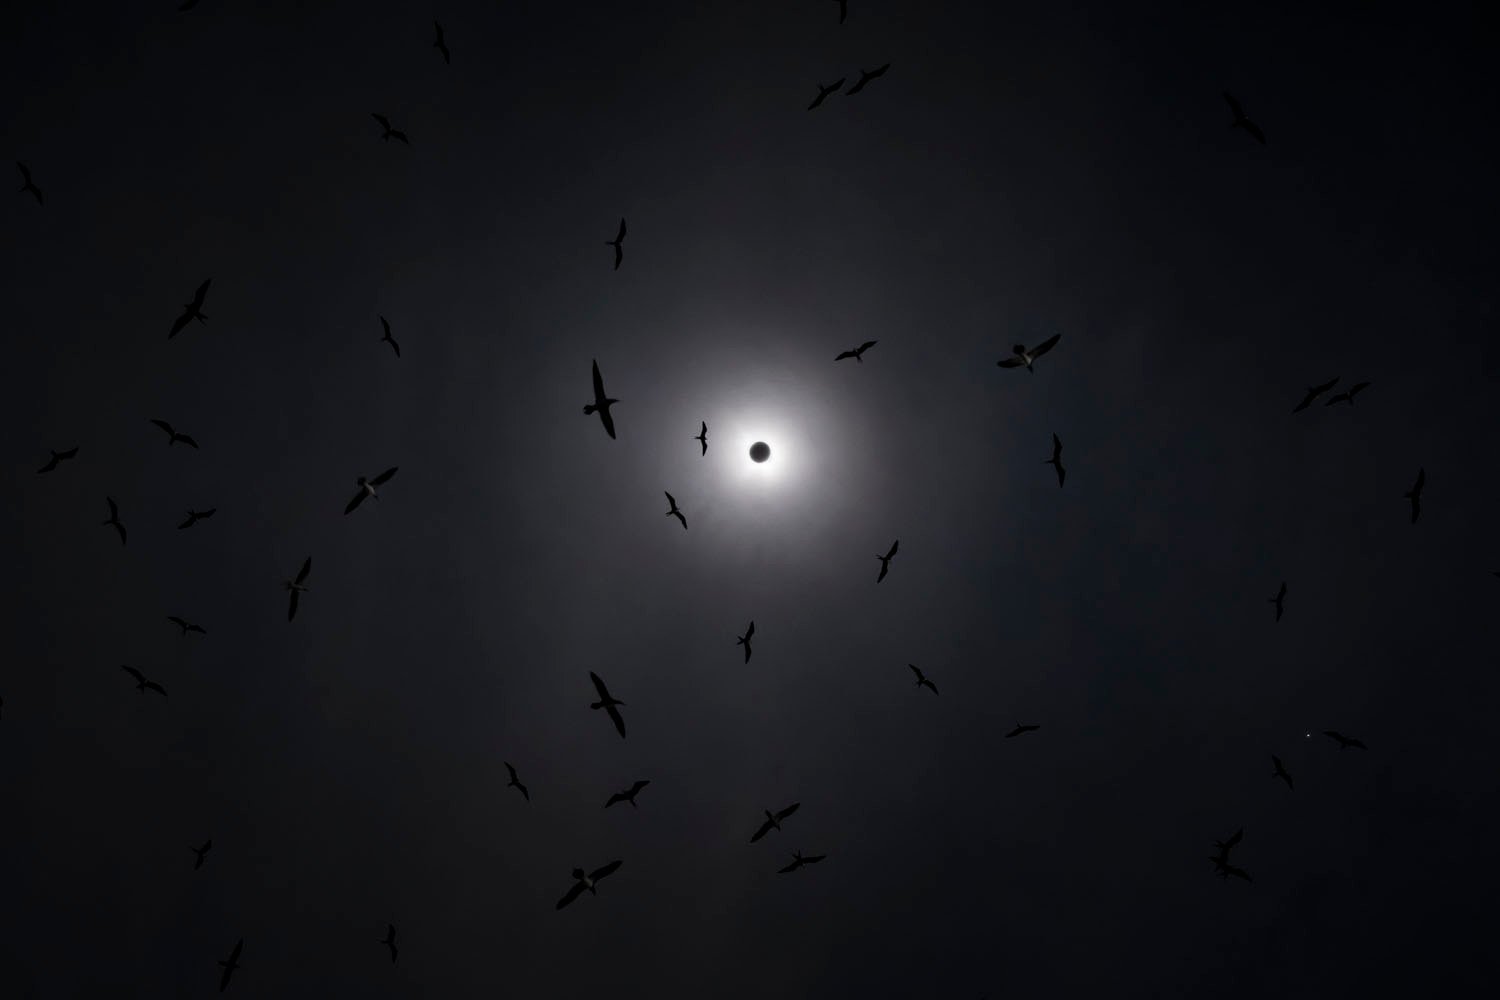 Silhouettes of many birds flying around a bright solar eclipse in a dark sky.